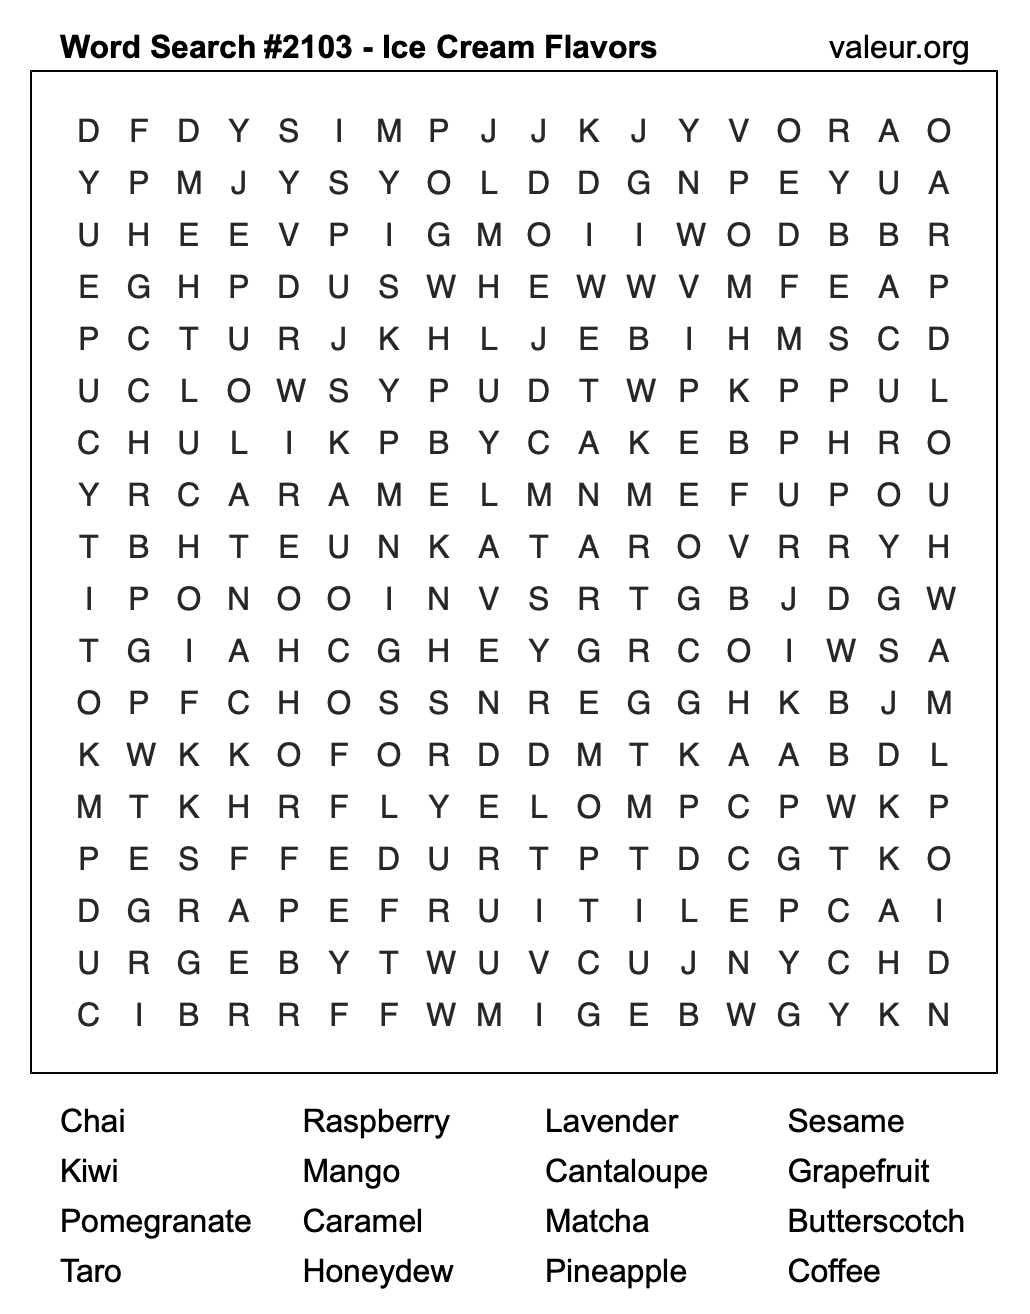 Word Search Puzzle with Ice Cream Flavors #2103